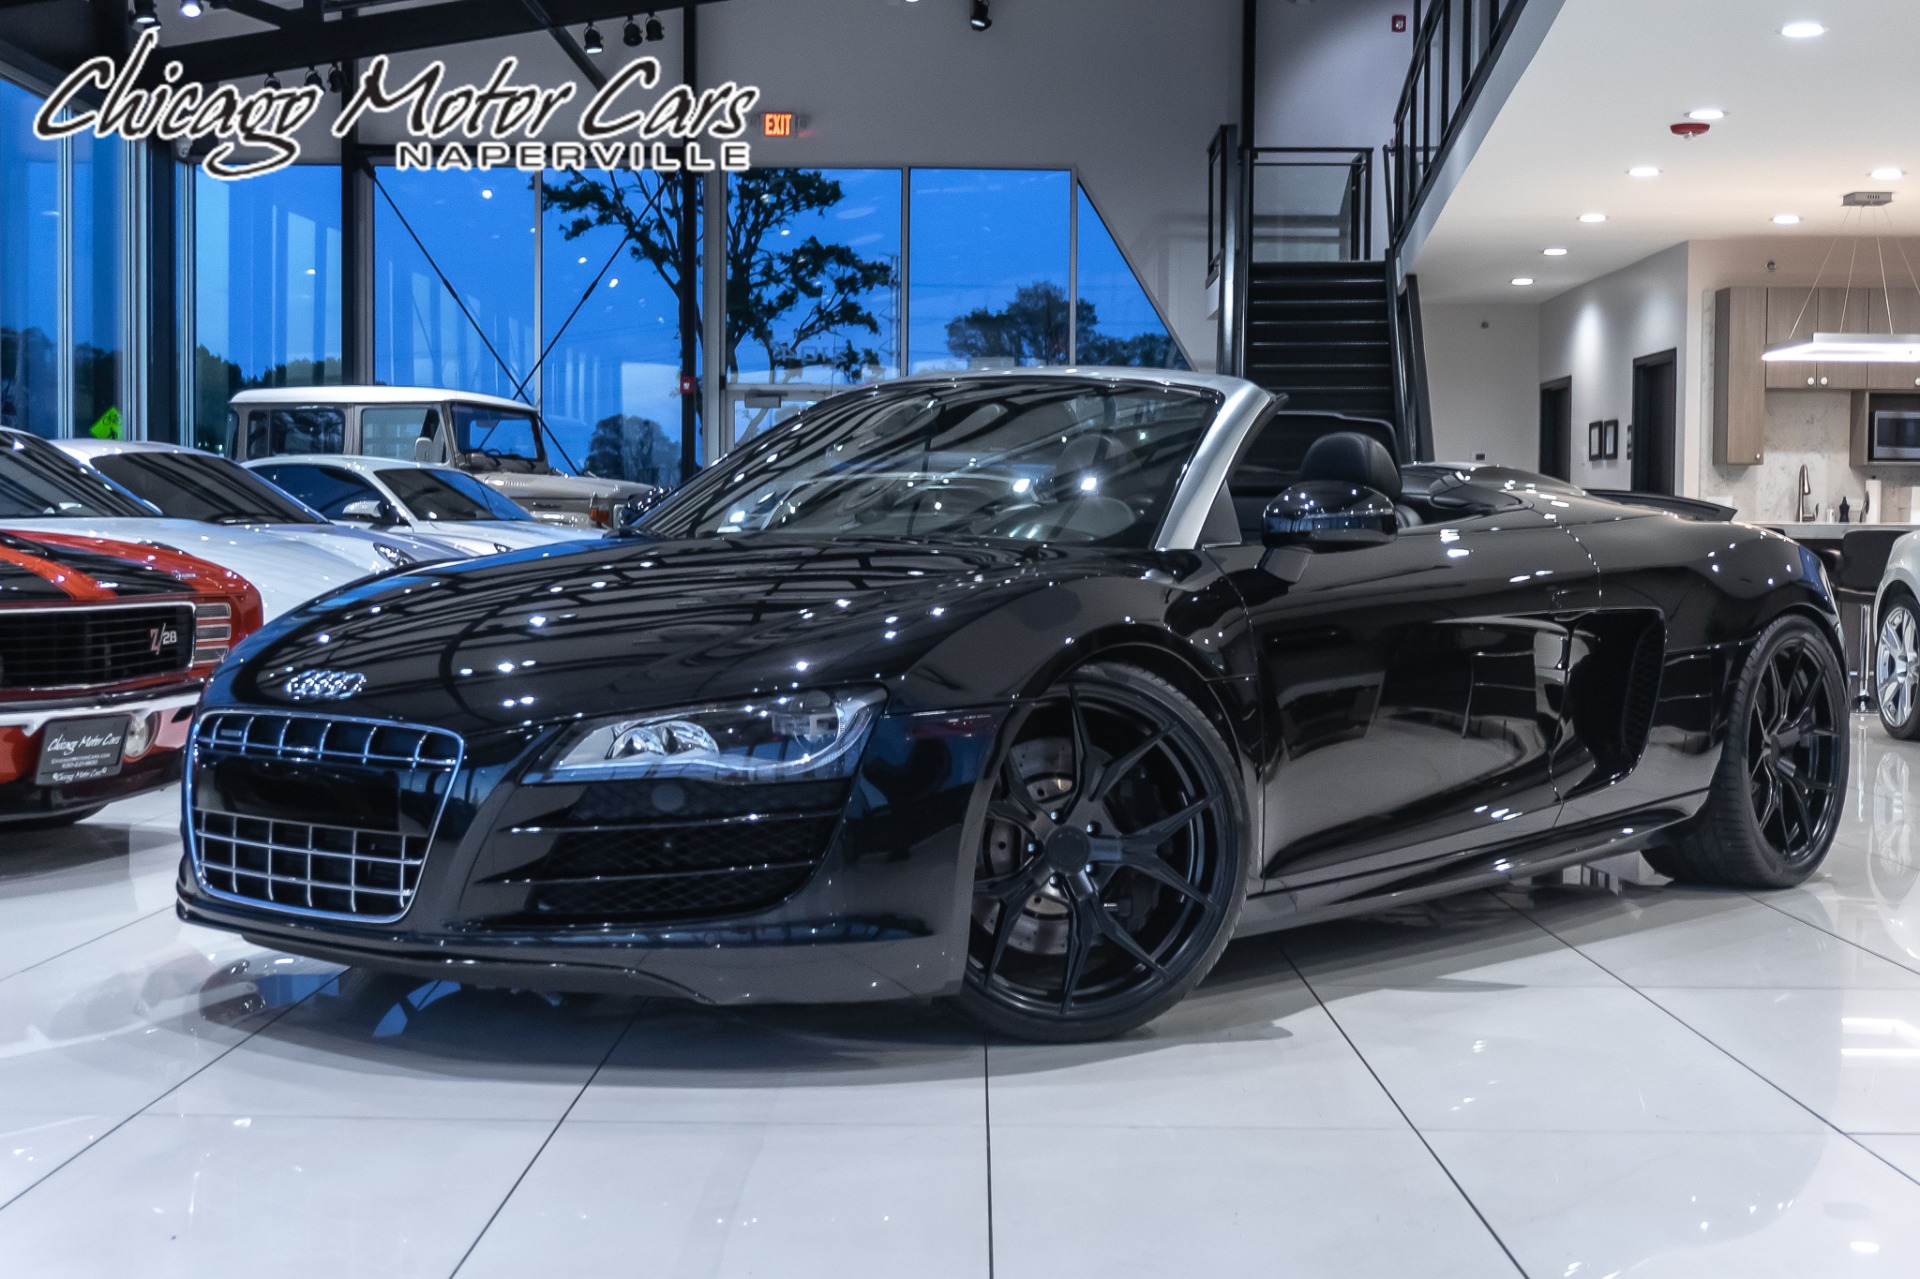 Used-2011-Audi-R8-V10-52L-SPYDER-Quattro-JUST-SERVICED-NEW-SUSPENSION-AND-TIRES-CUSTOM-EXHAUST